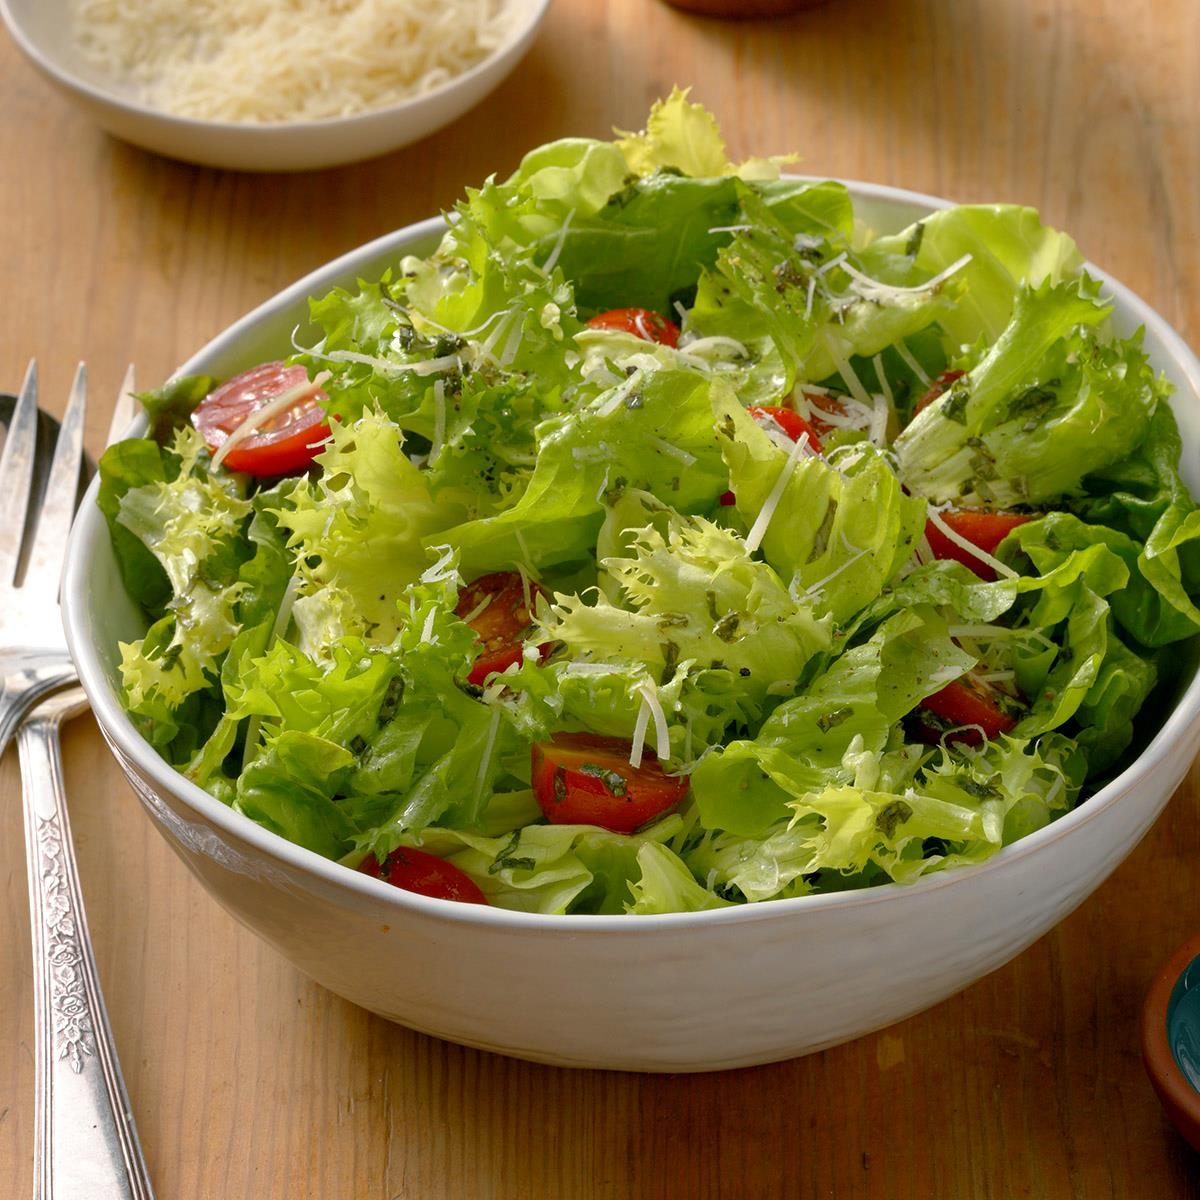 Simple Green Salad with Vinaigrette dressing - Nicky's Kitchen